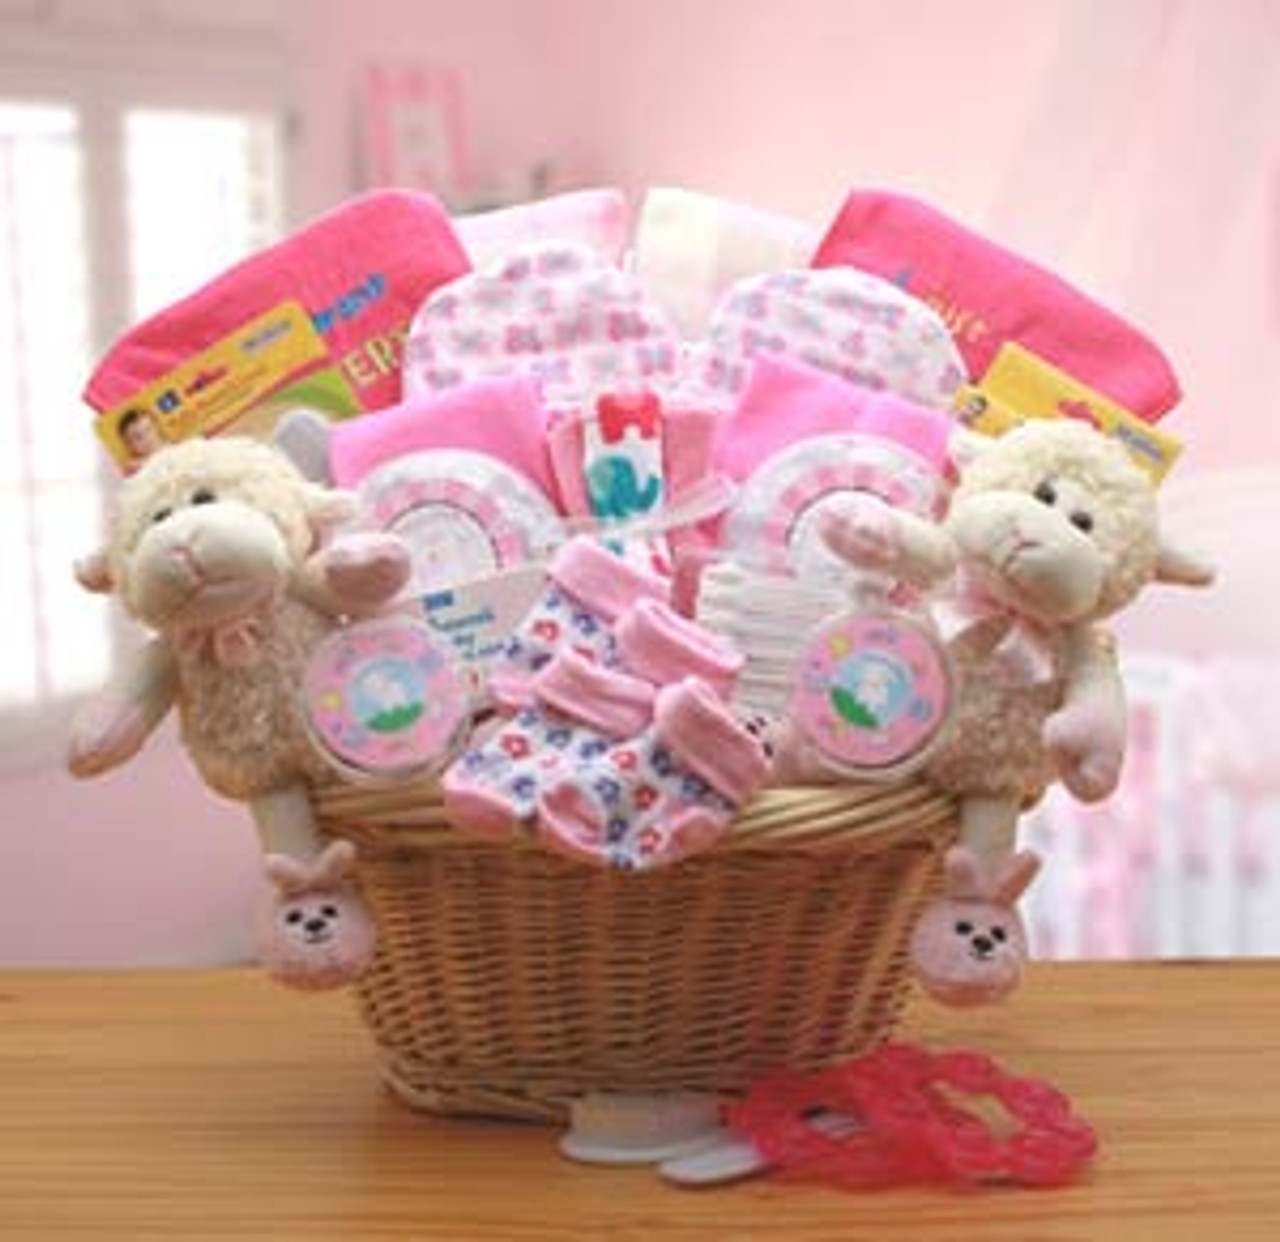 Double Delight Twins New Babies Gift Basket - Pink - Baskets-n-Beyond